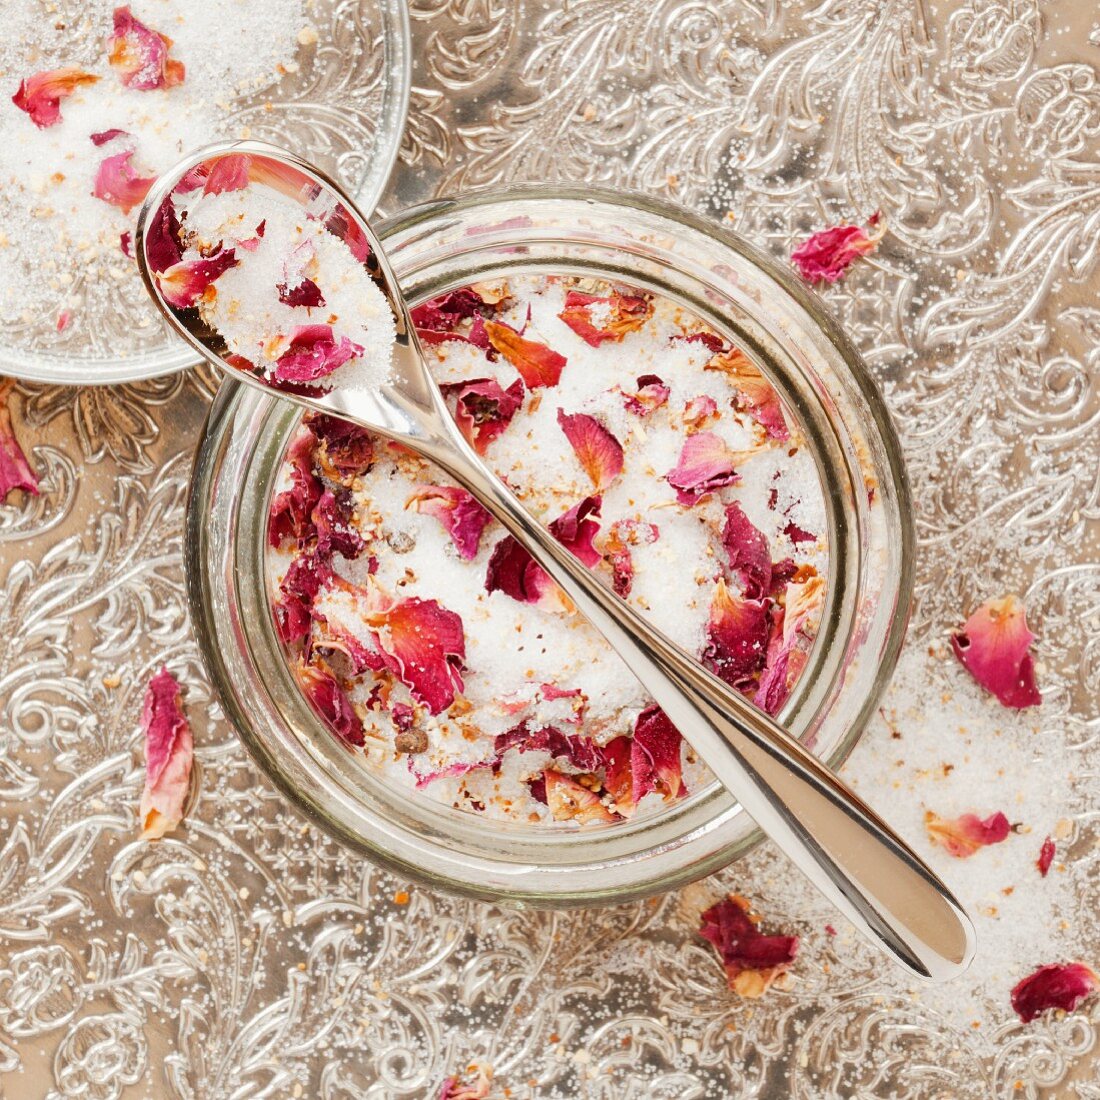 Rose scented sugar in a glass bowl with a spoon on a silver tray